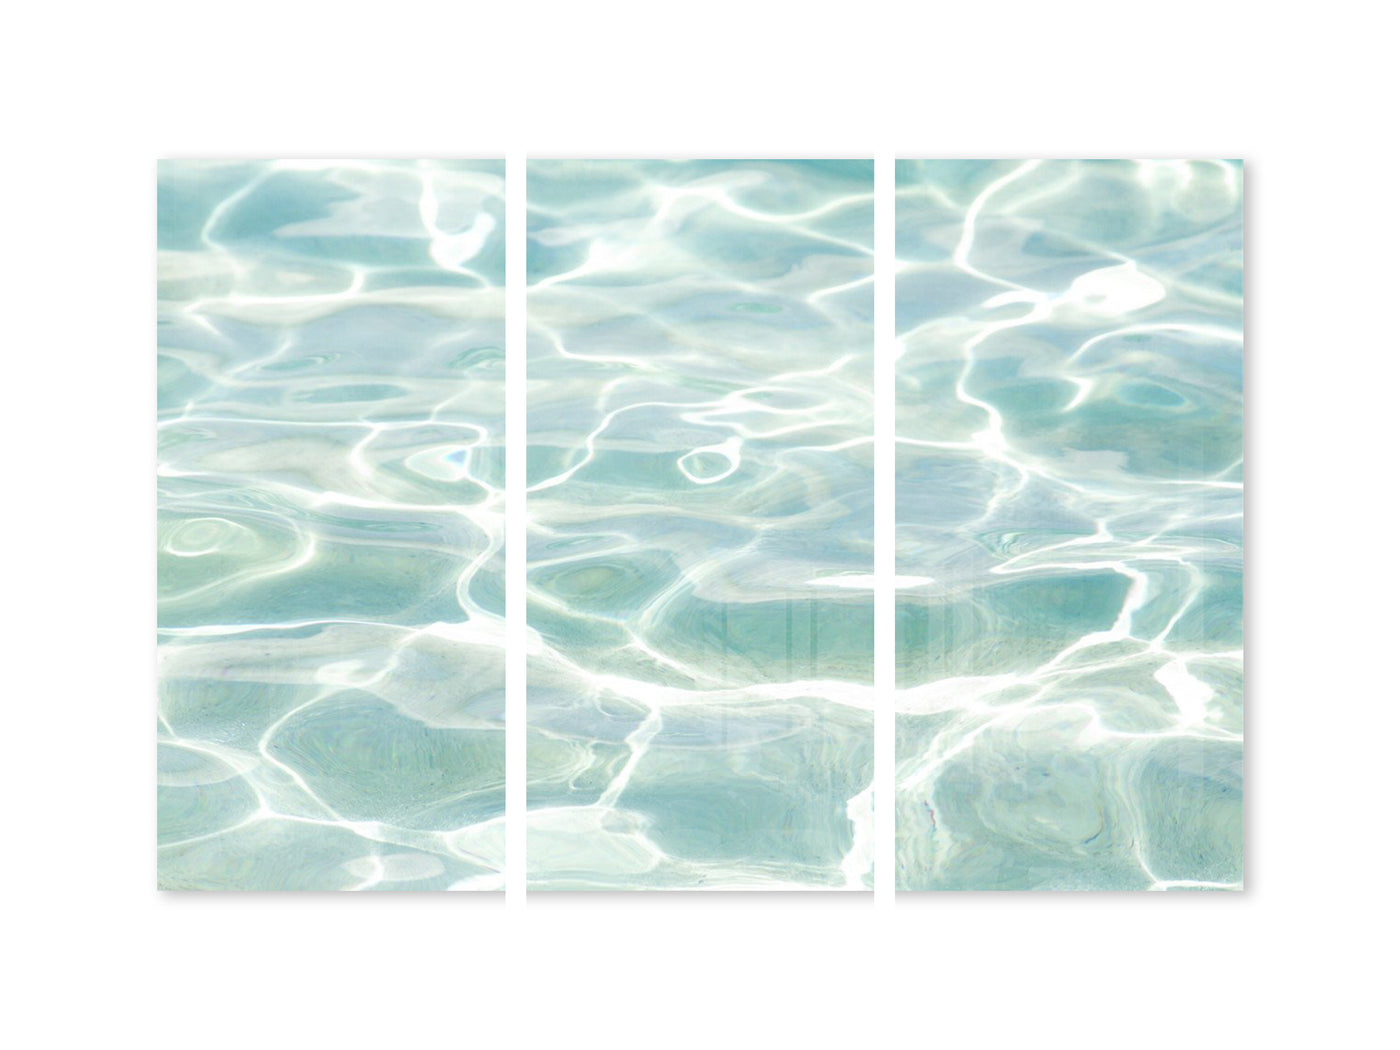 Caribbean Sea No 1 - Acrylic glass 3 panel print by Cattie Coyle Photography